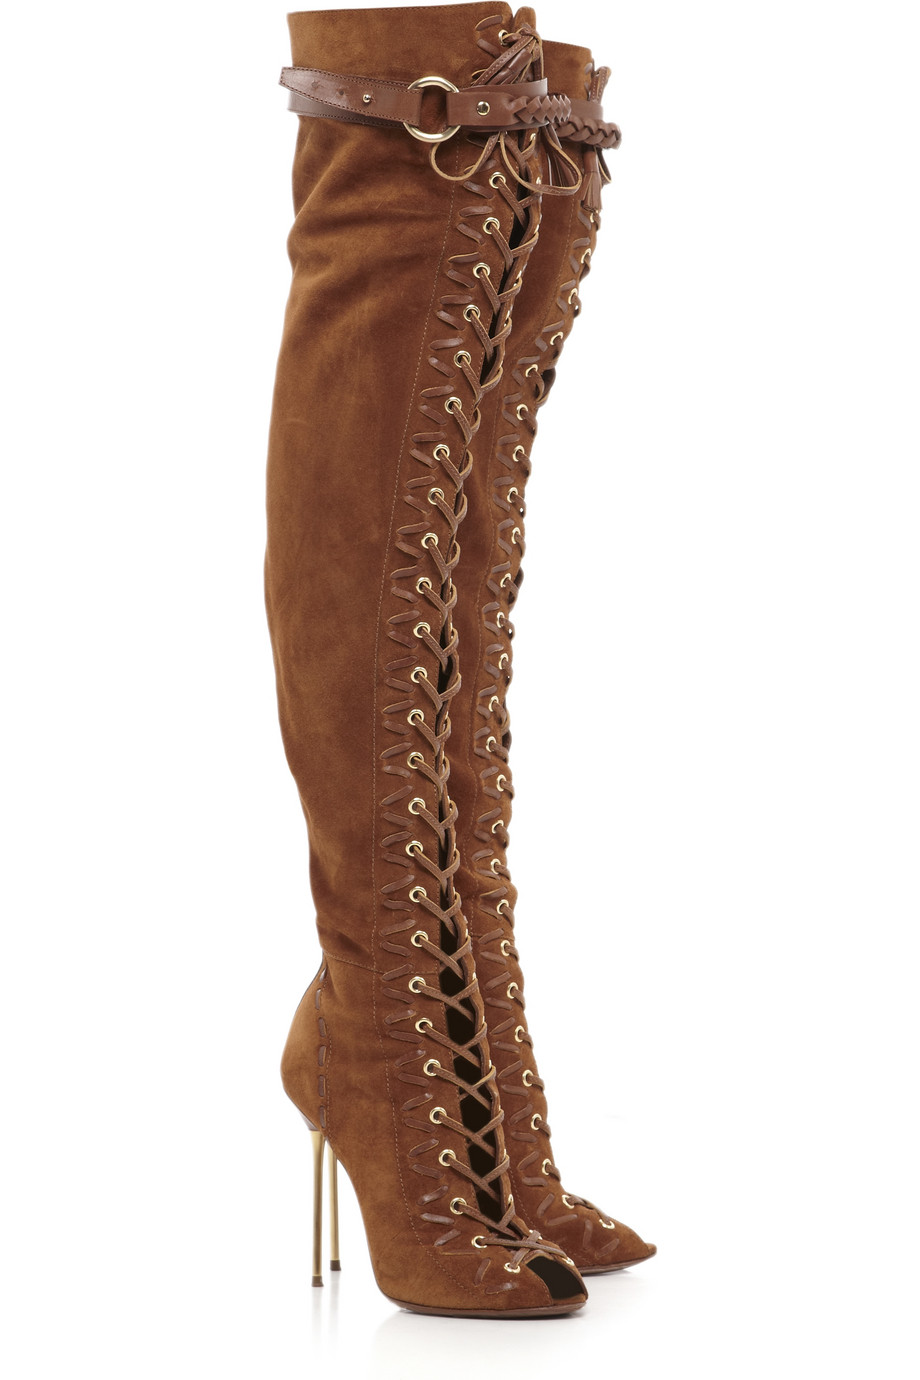 Emilio Pucci Lace-up Suede Thigh-high Boots in Brown | Lyst